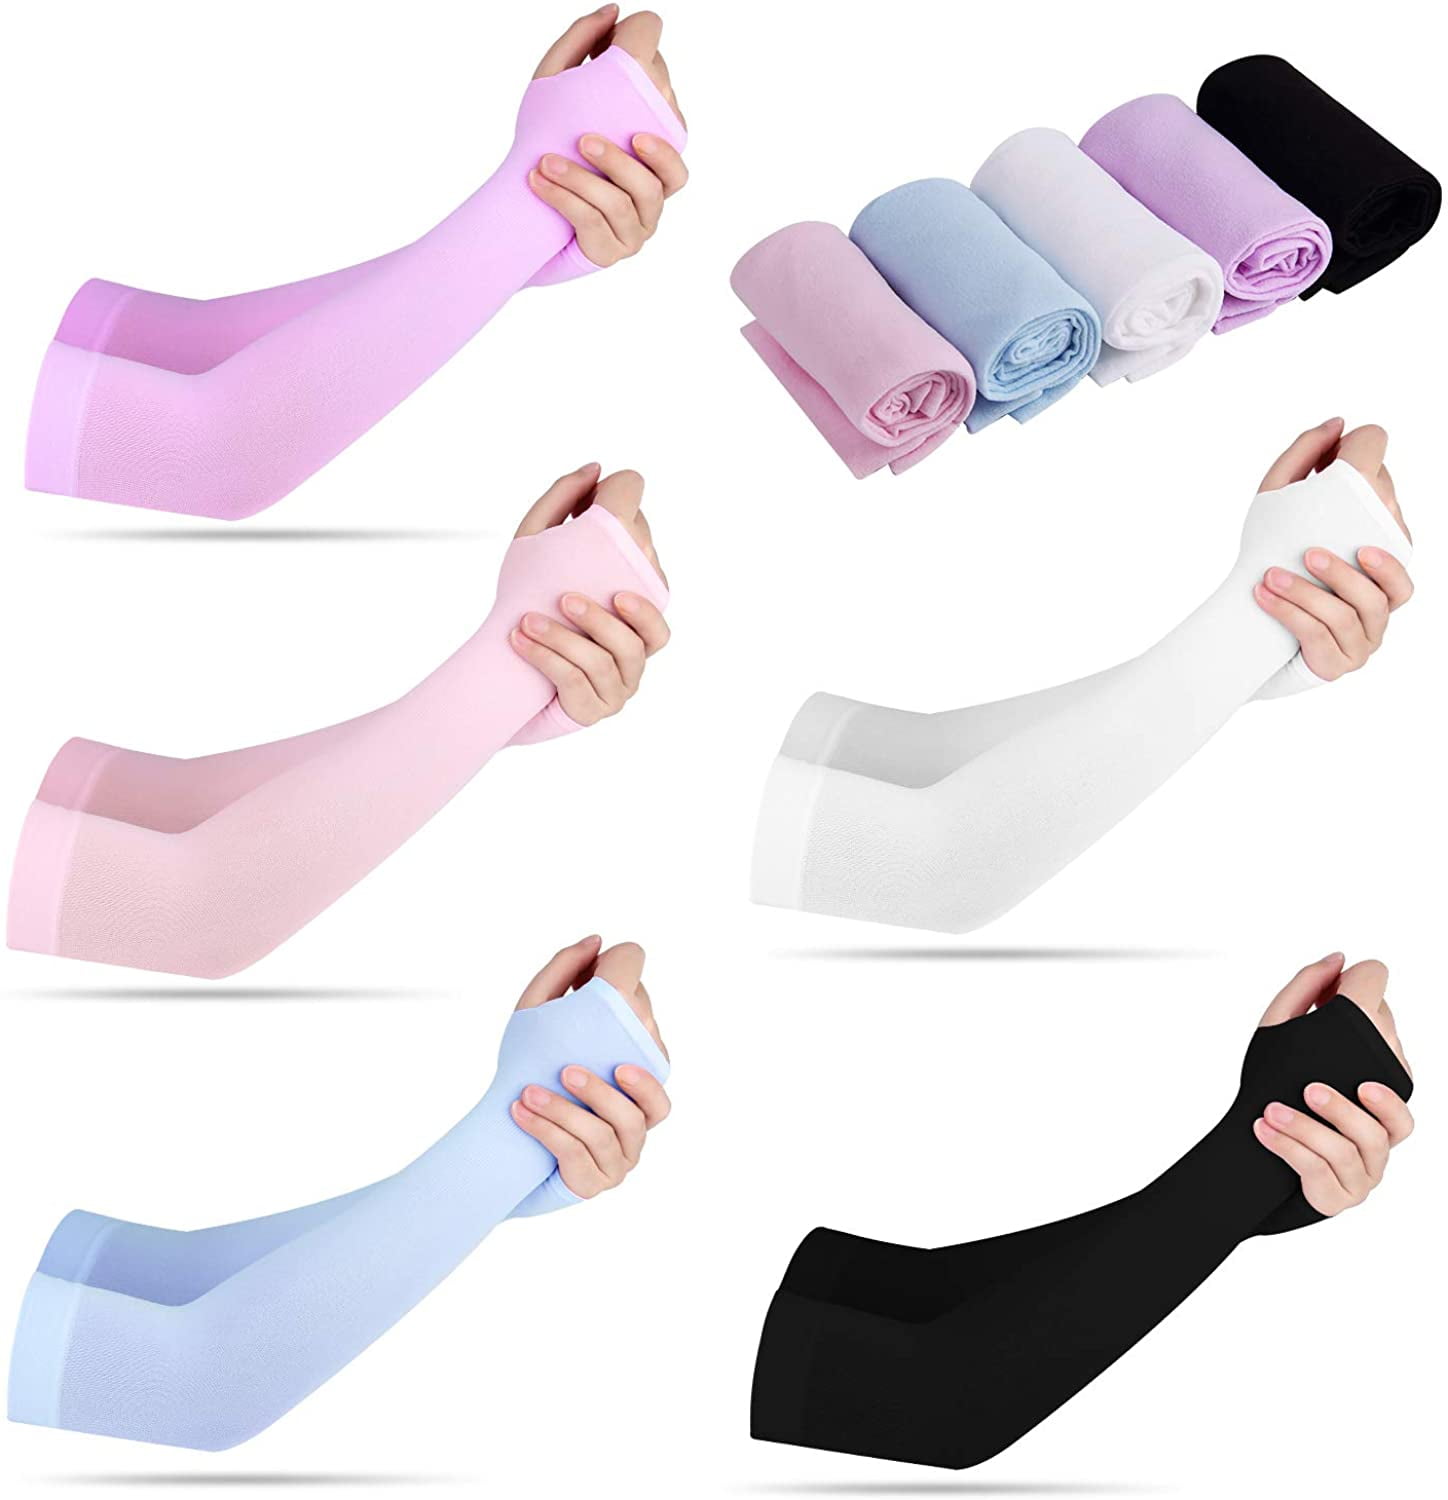 Arm Sleeves with Zipper Pocket for Men/Women Sun UV Protection Cooling Arm Cover Carrying Phone/Key 